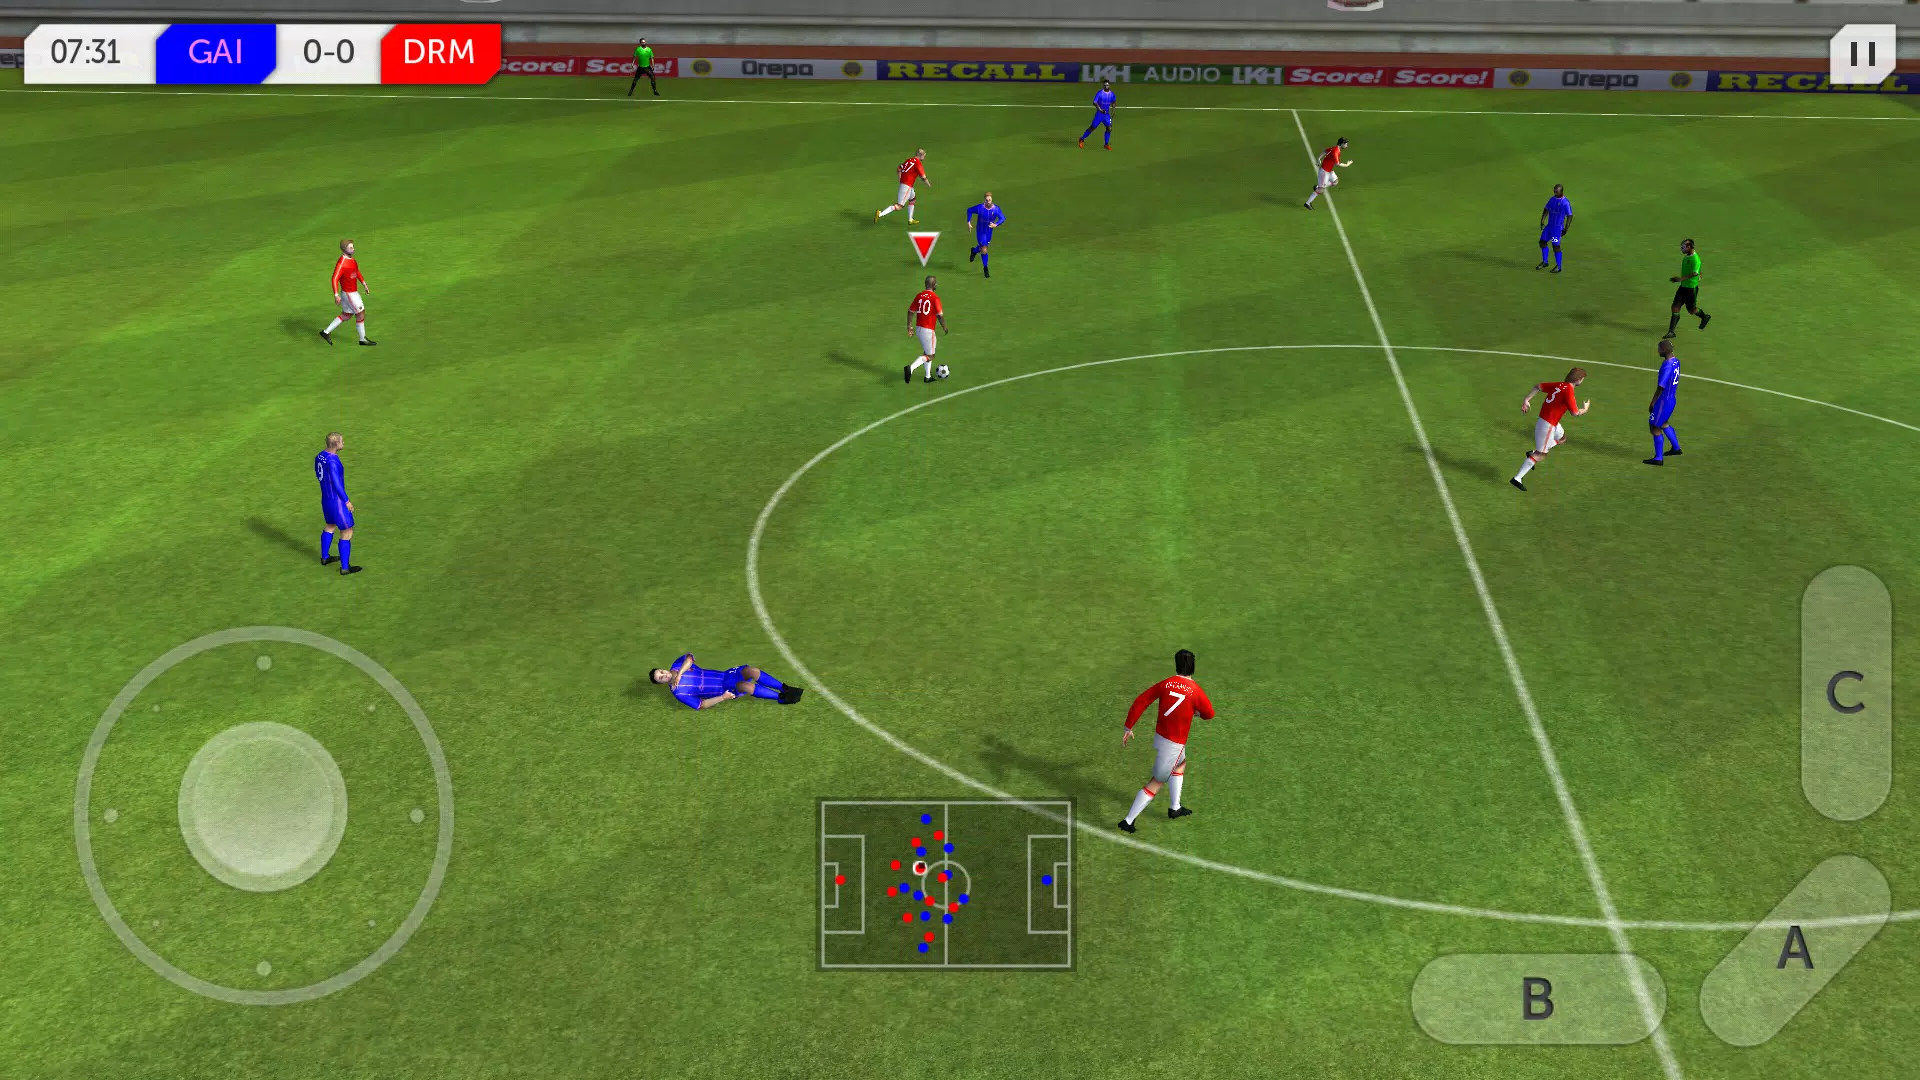 Dream League Soccer APK for Android Download